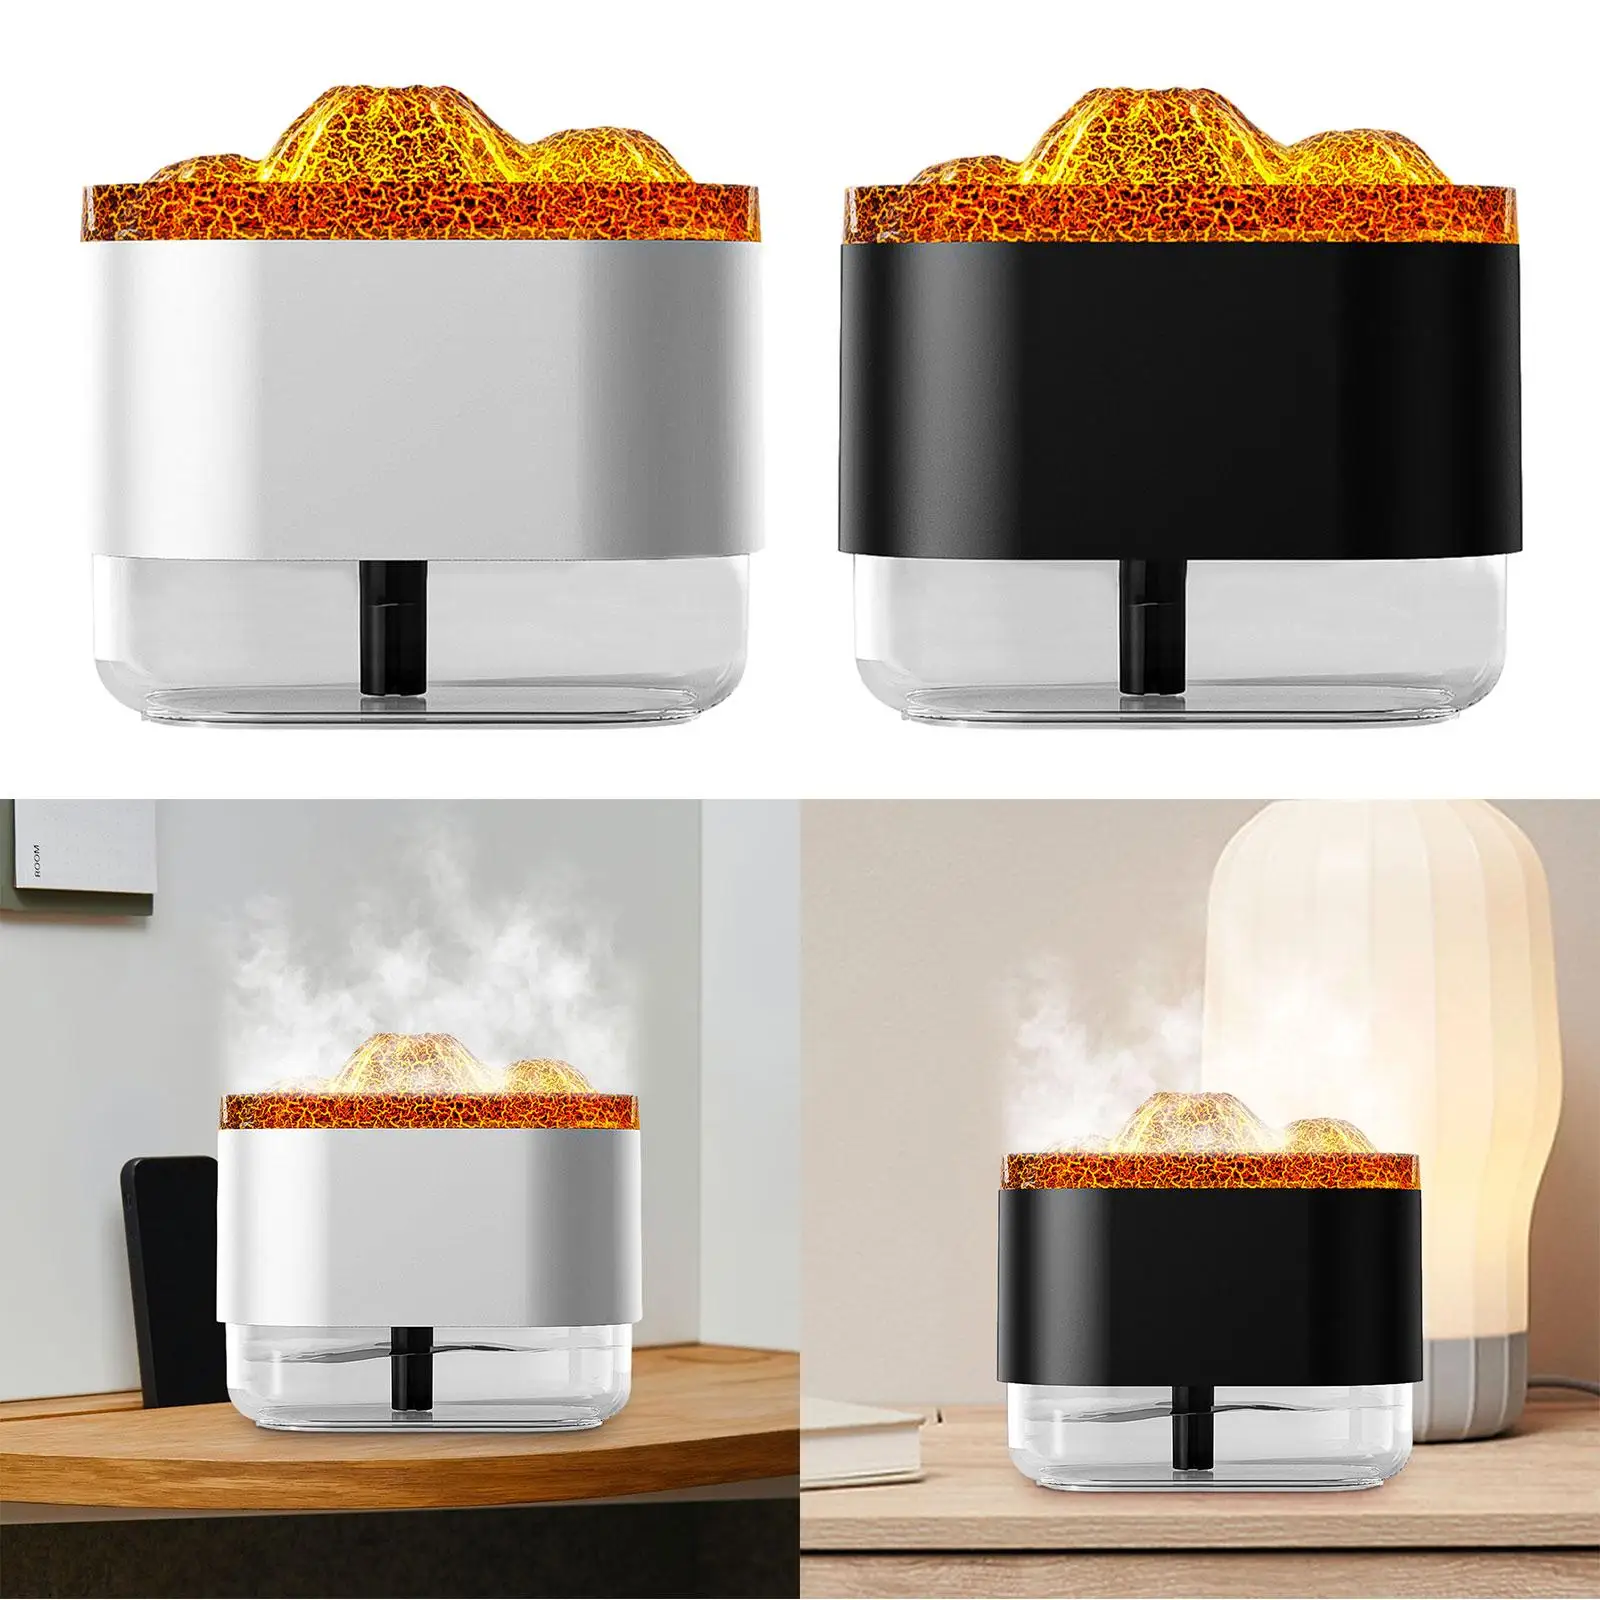 300ml USB Simulated Volcano Bedroom Humidifier Quiet Personal Humidifier Portable with Night Light for Daily Use Multifunctional